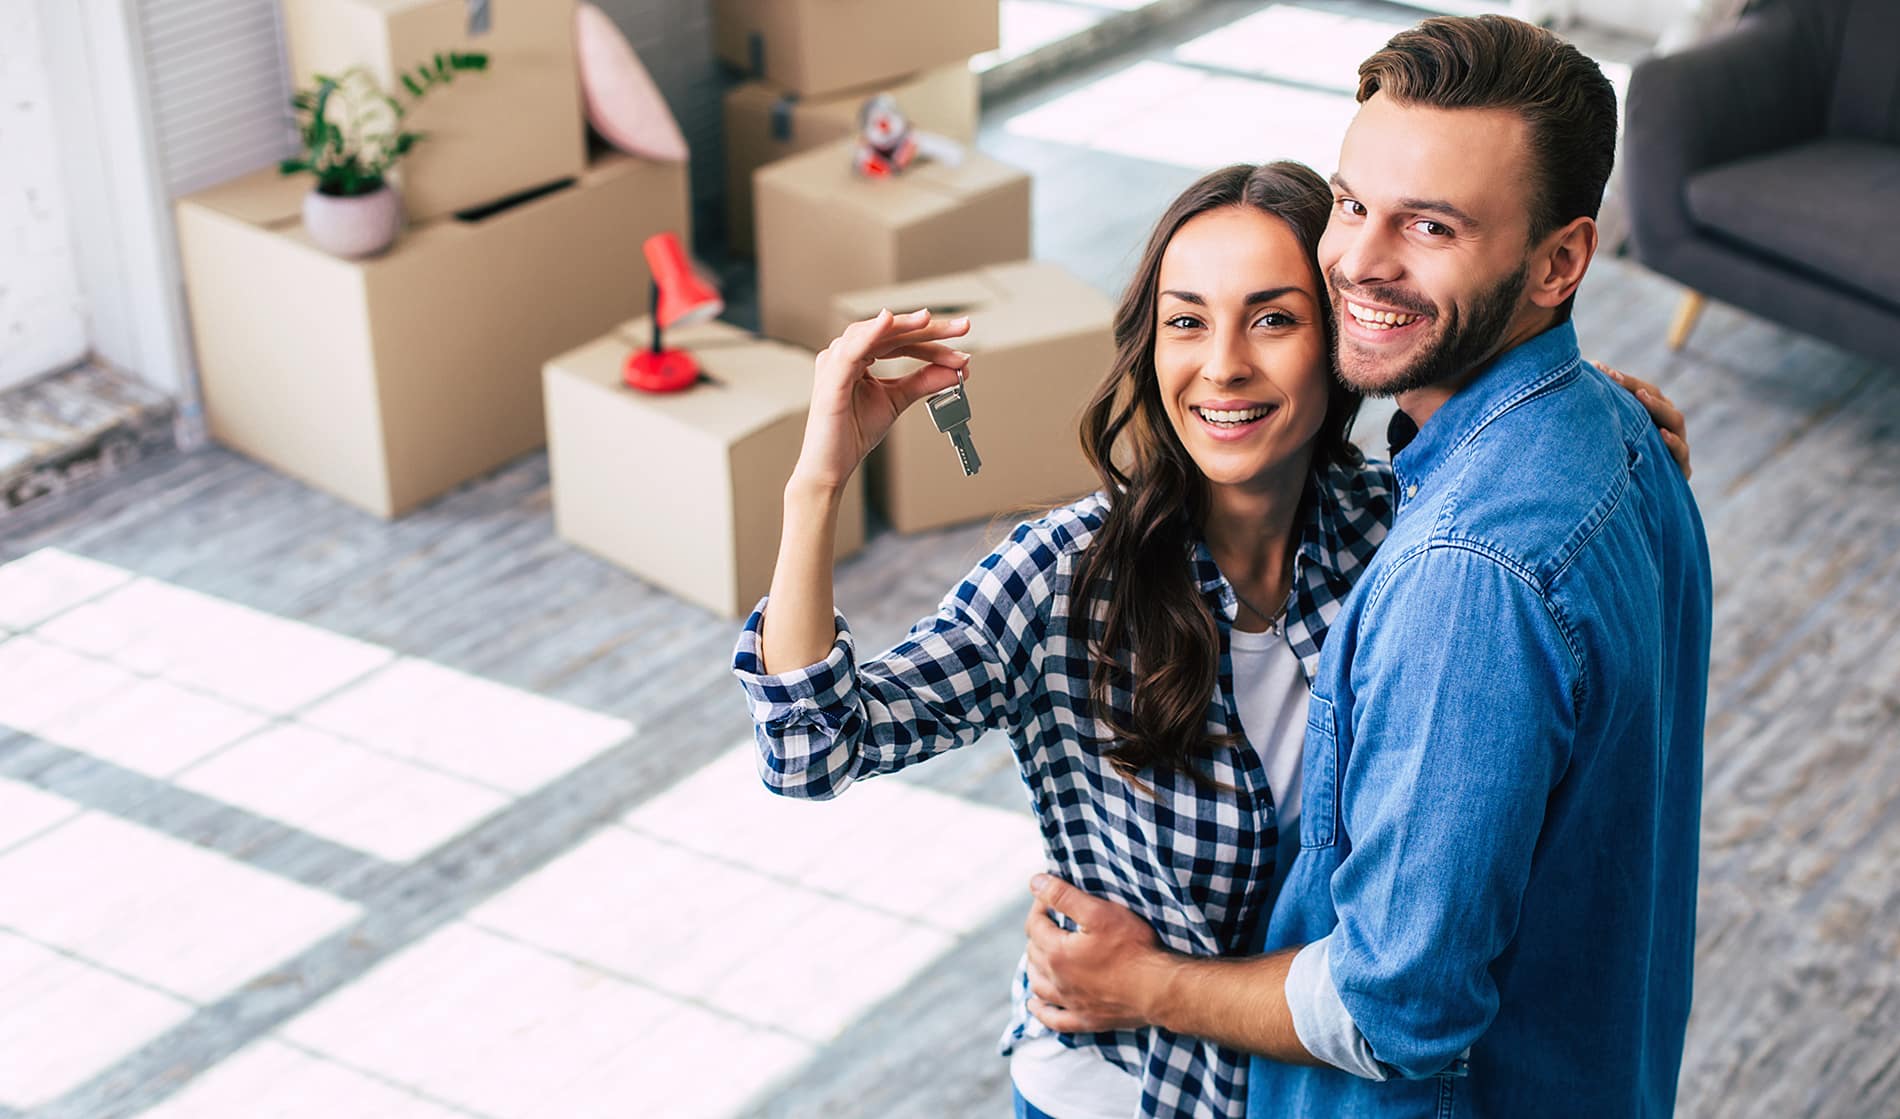 A young couple happily holding keys to their new home